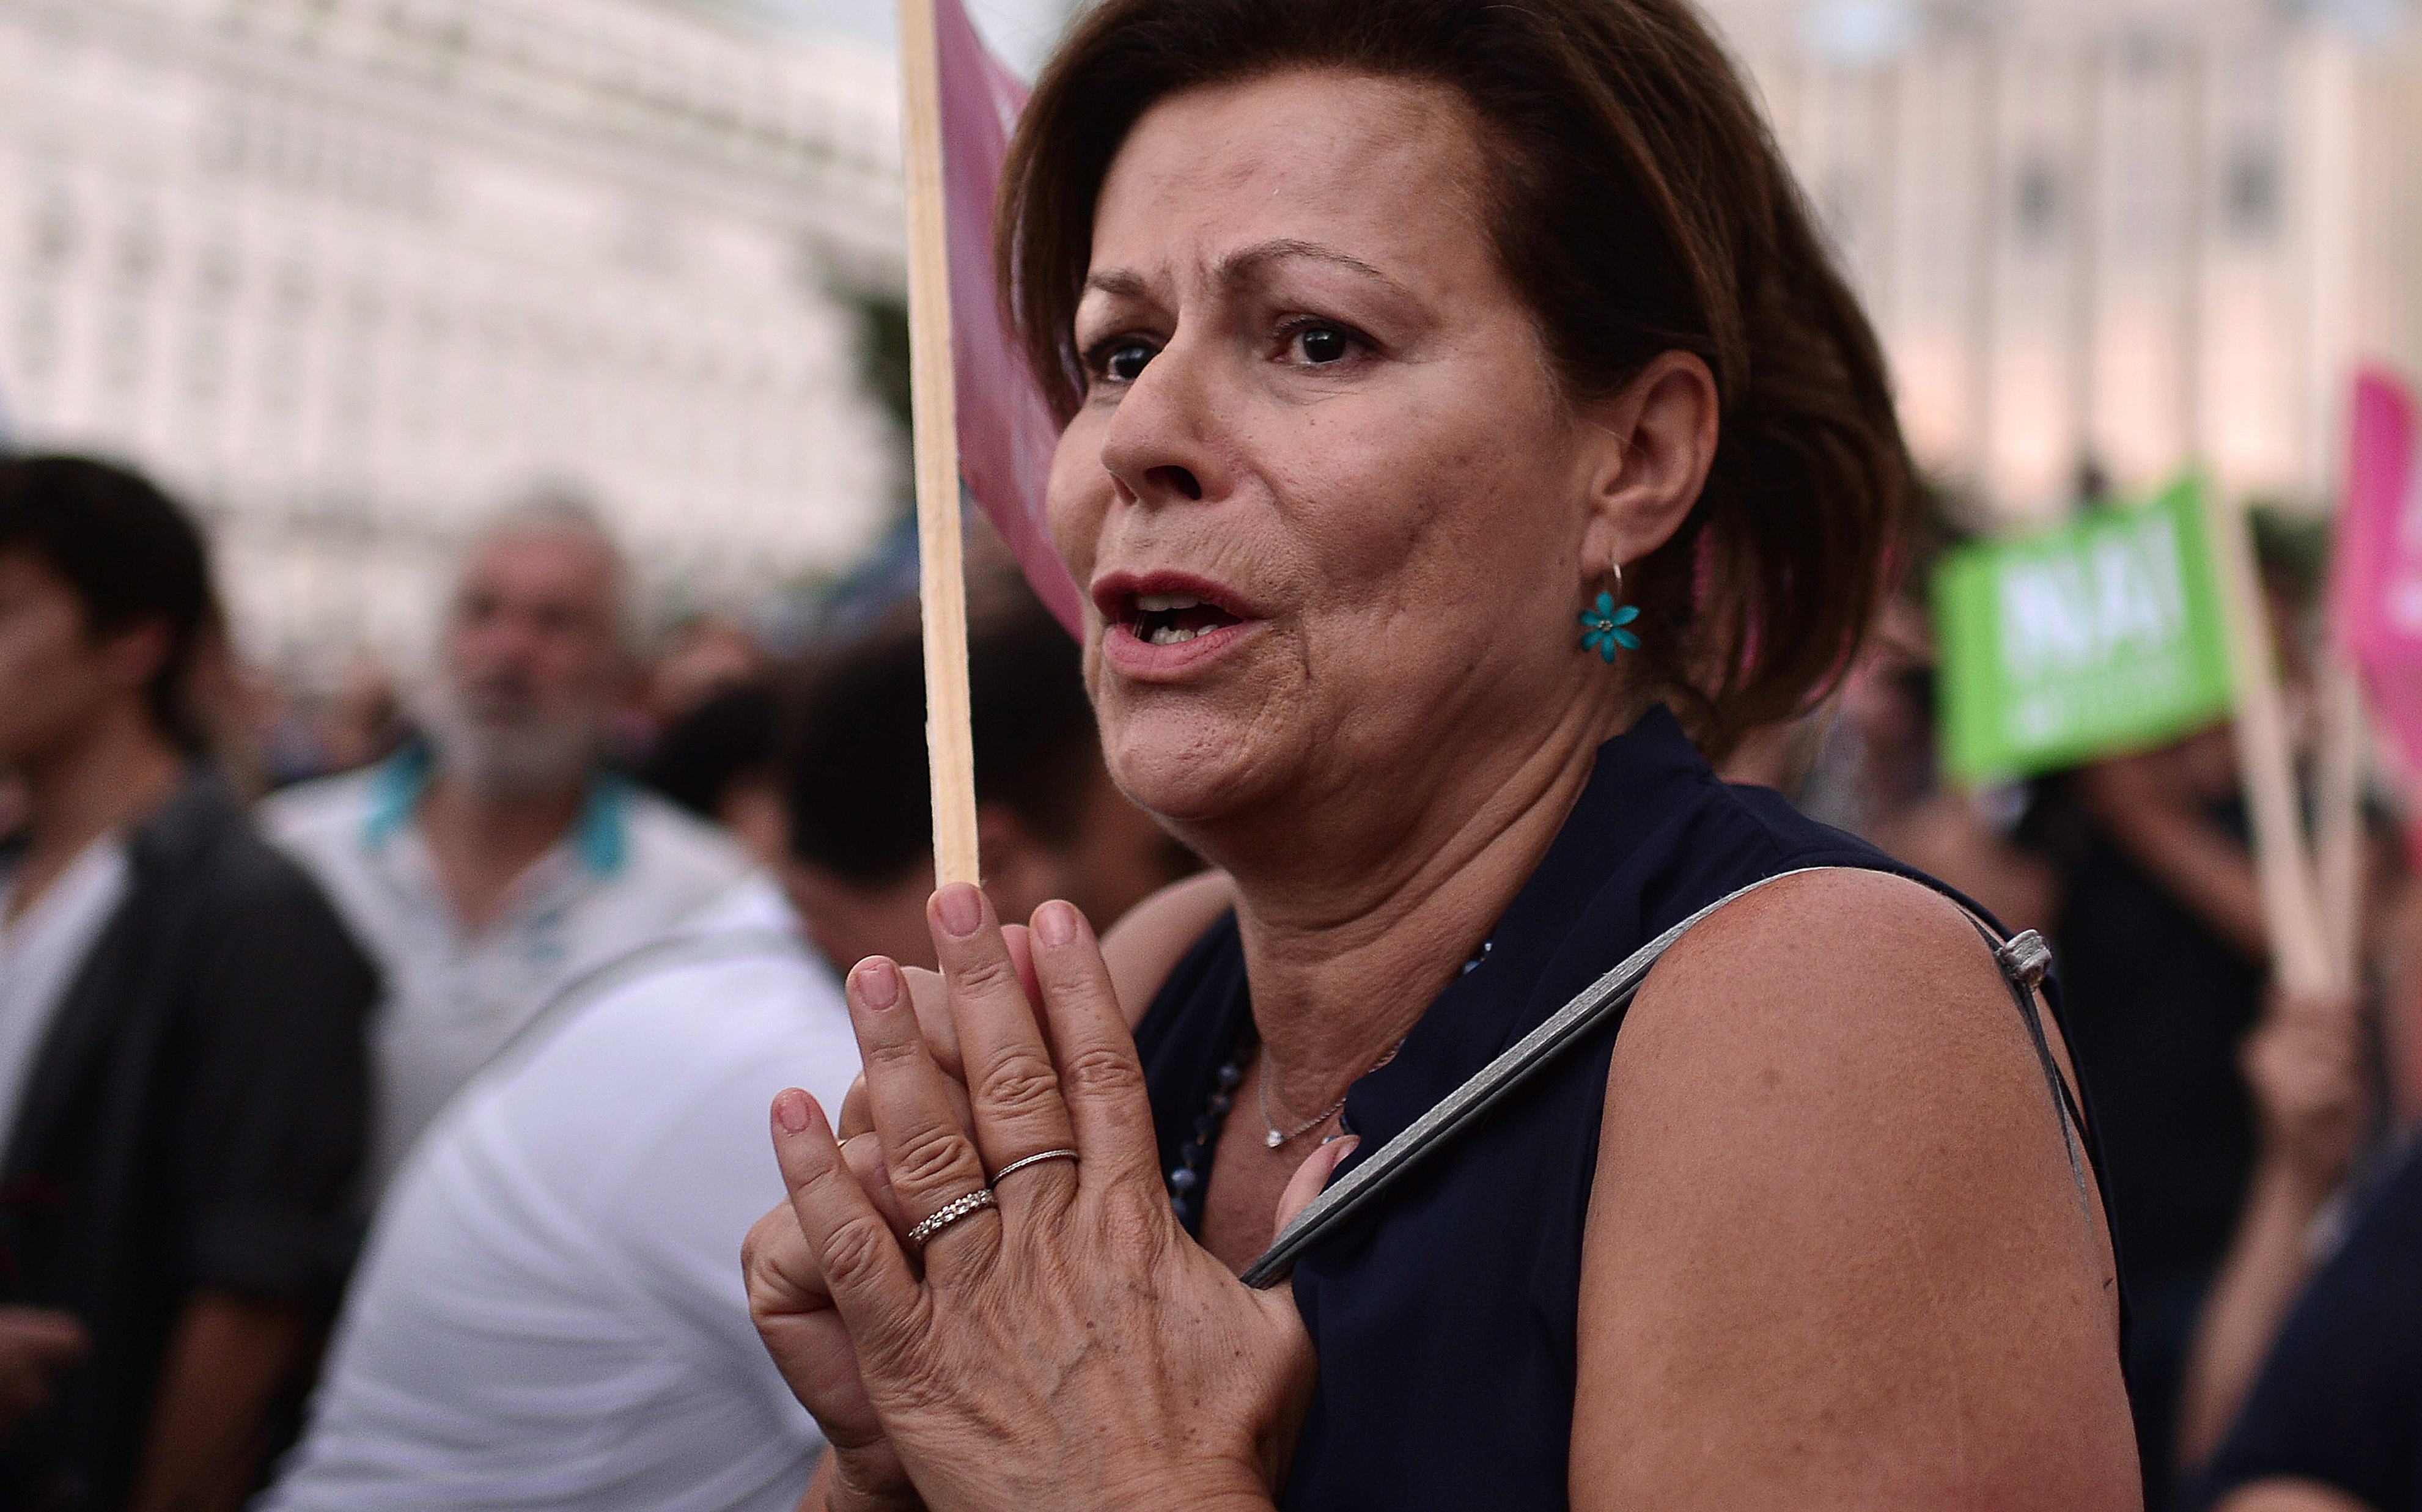 Pro-eurozone protesters gather in front of the parliament building in Athens on 30 June.